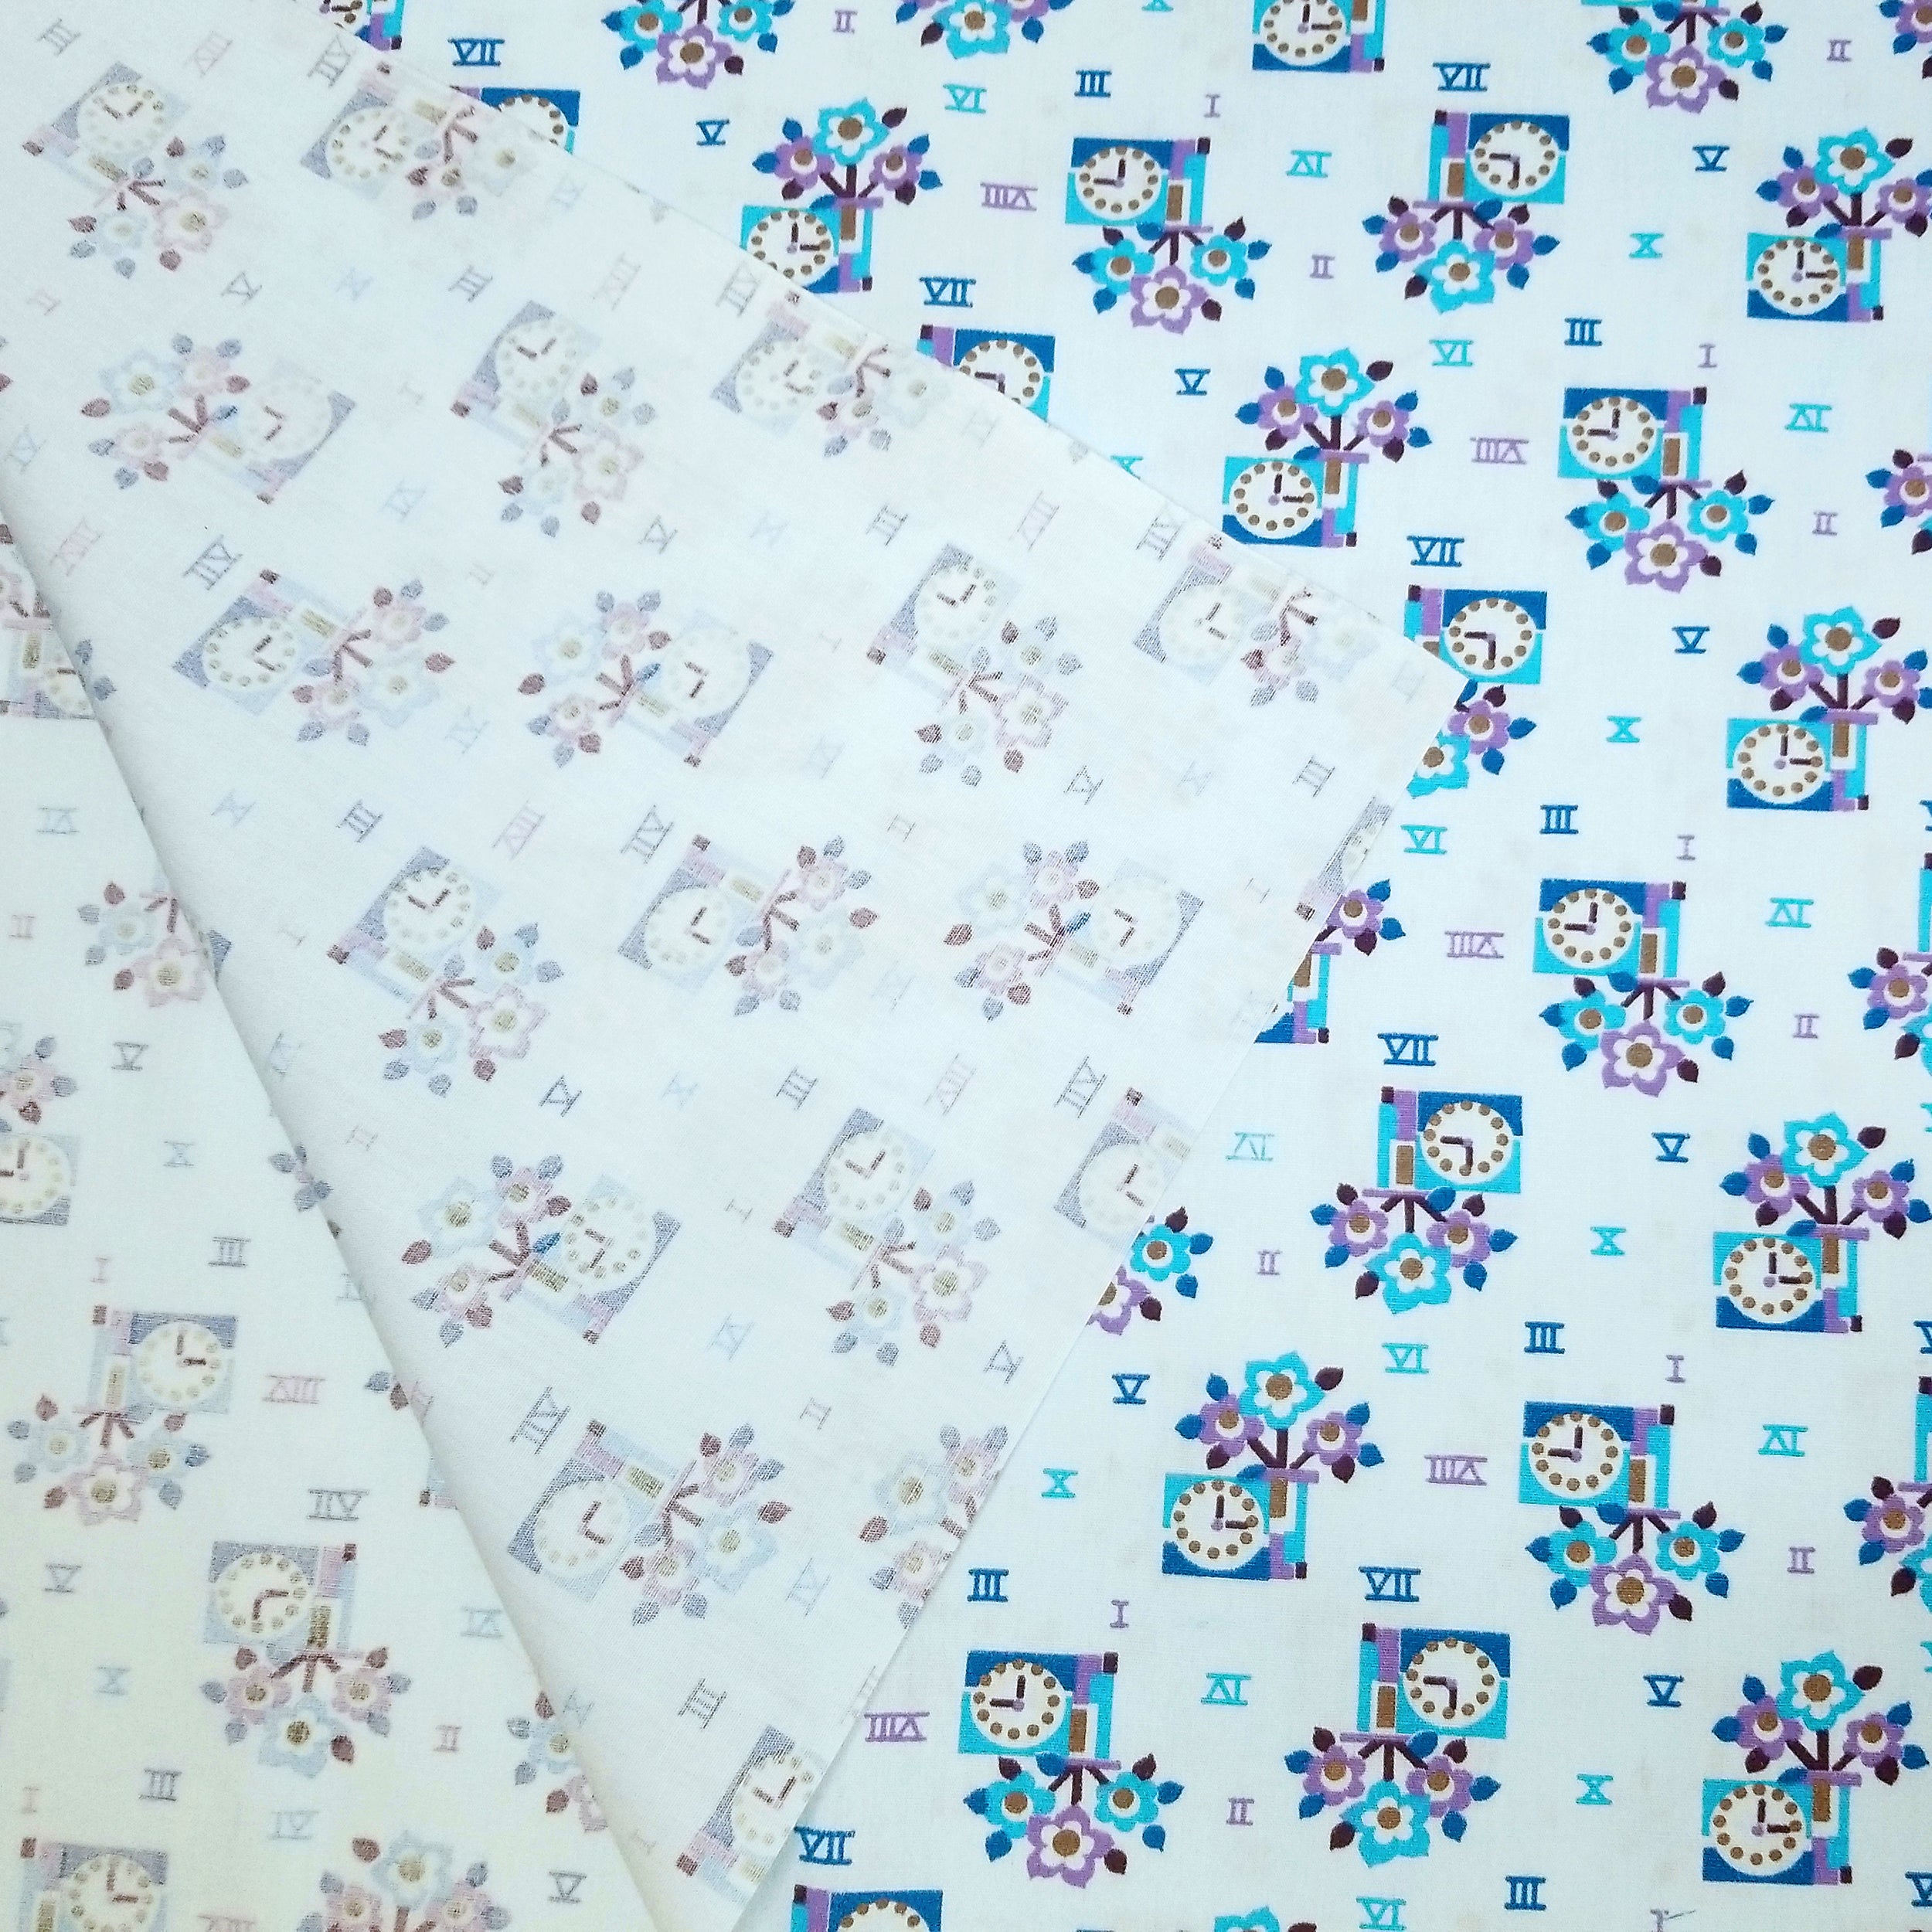 VINTAGE FABRIC BABY BOLT HALF-YARD - UNIQUE CLOCK AND FLOWERS PRINT IN PURPLE, BROWN, BLACK AND BLUES